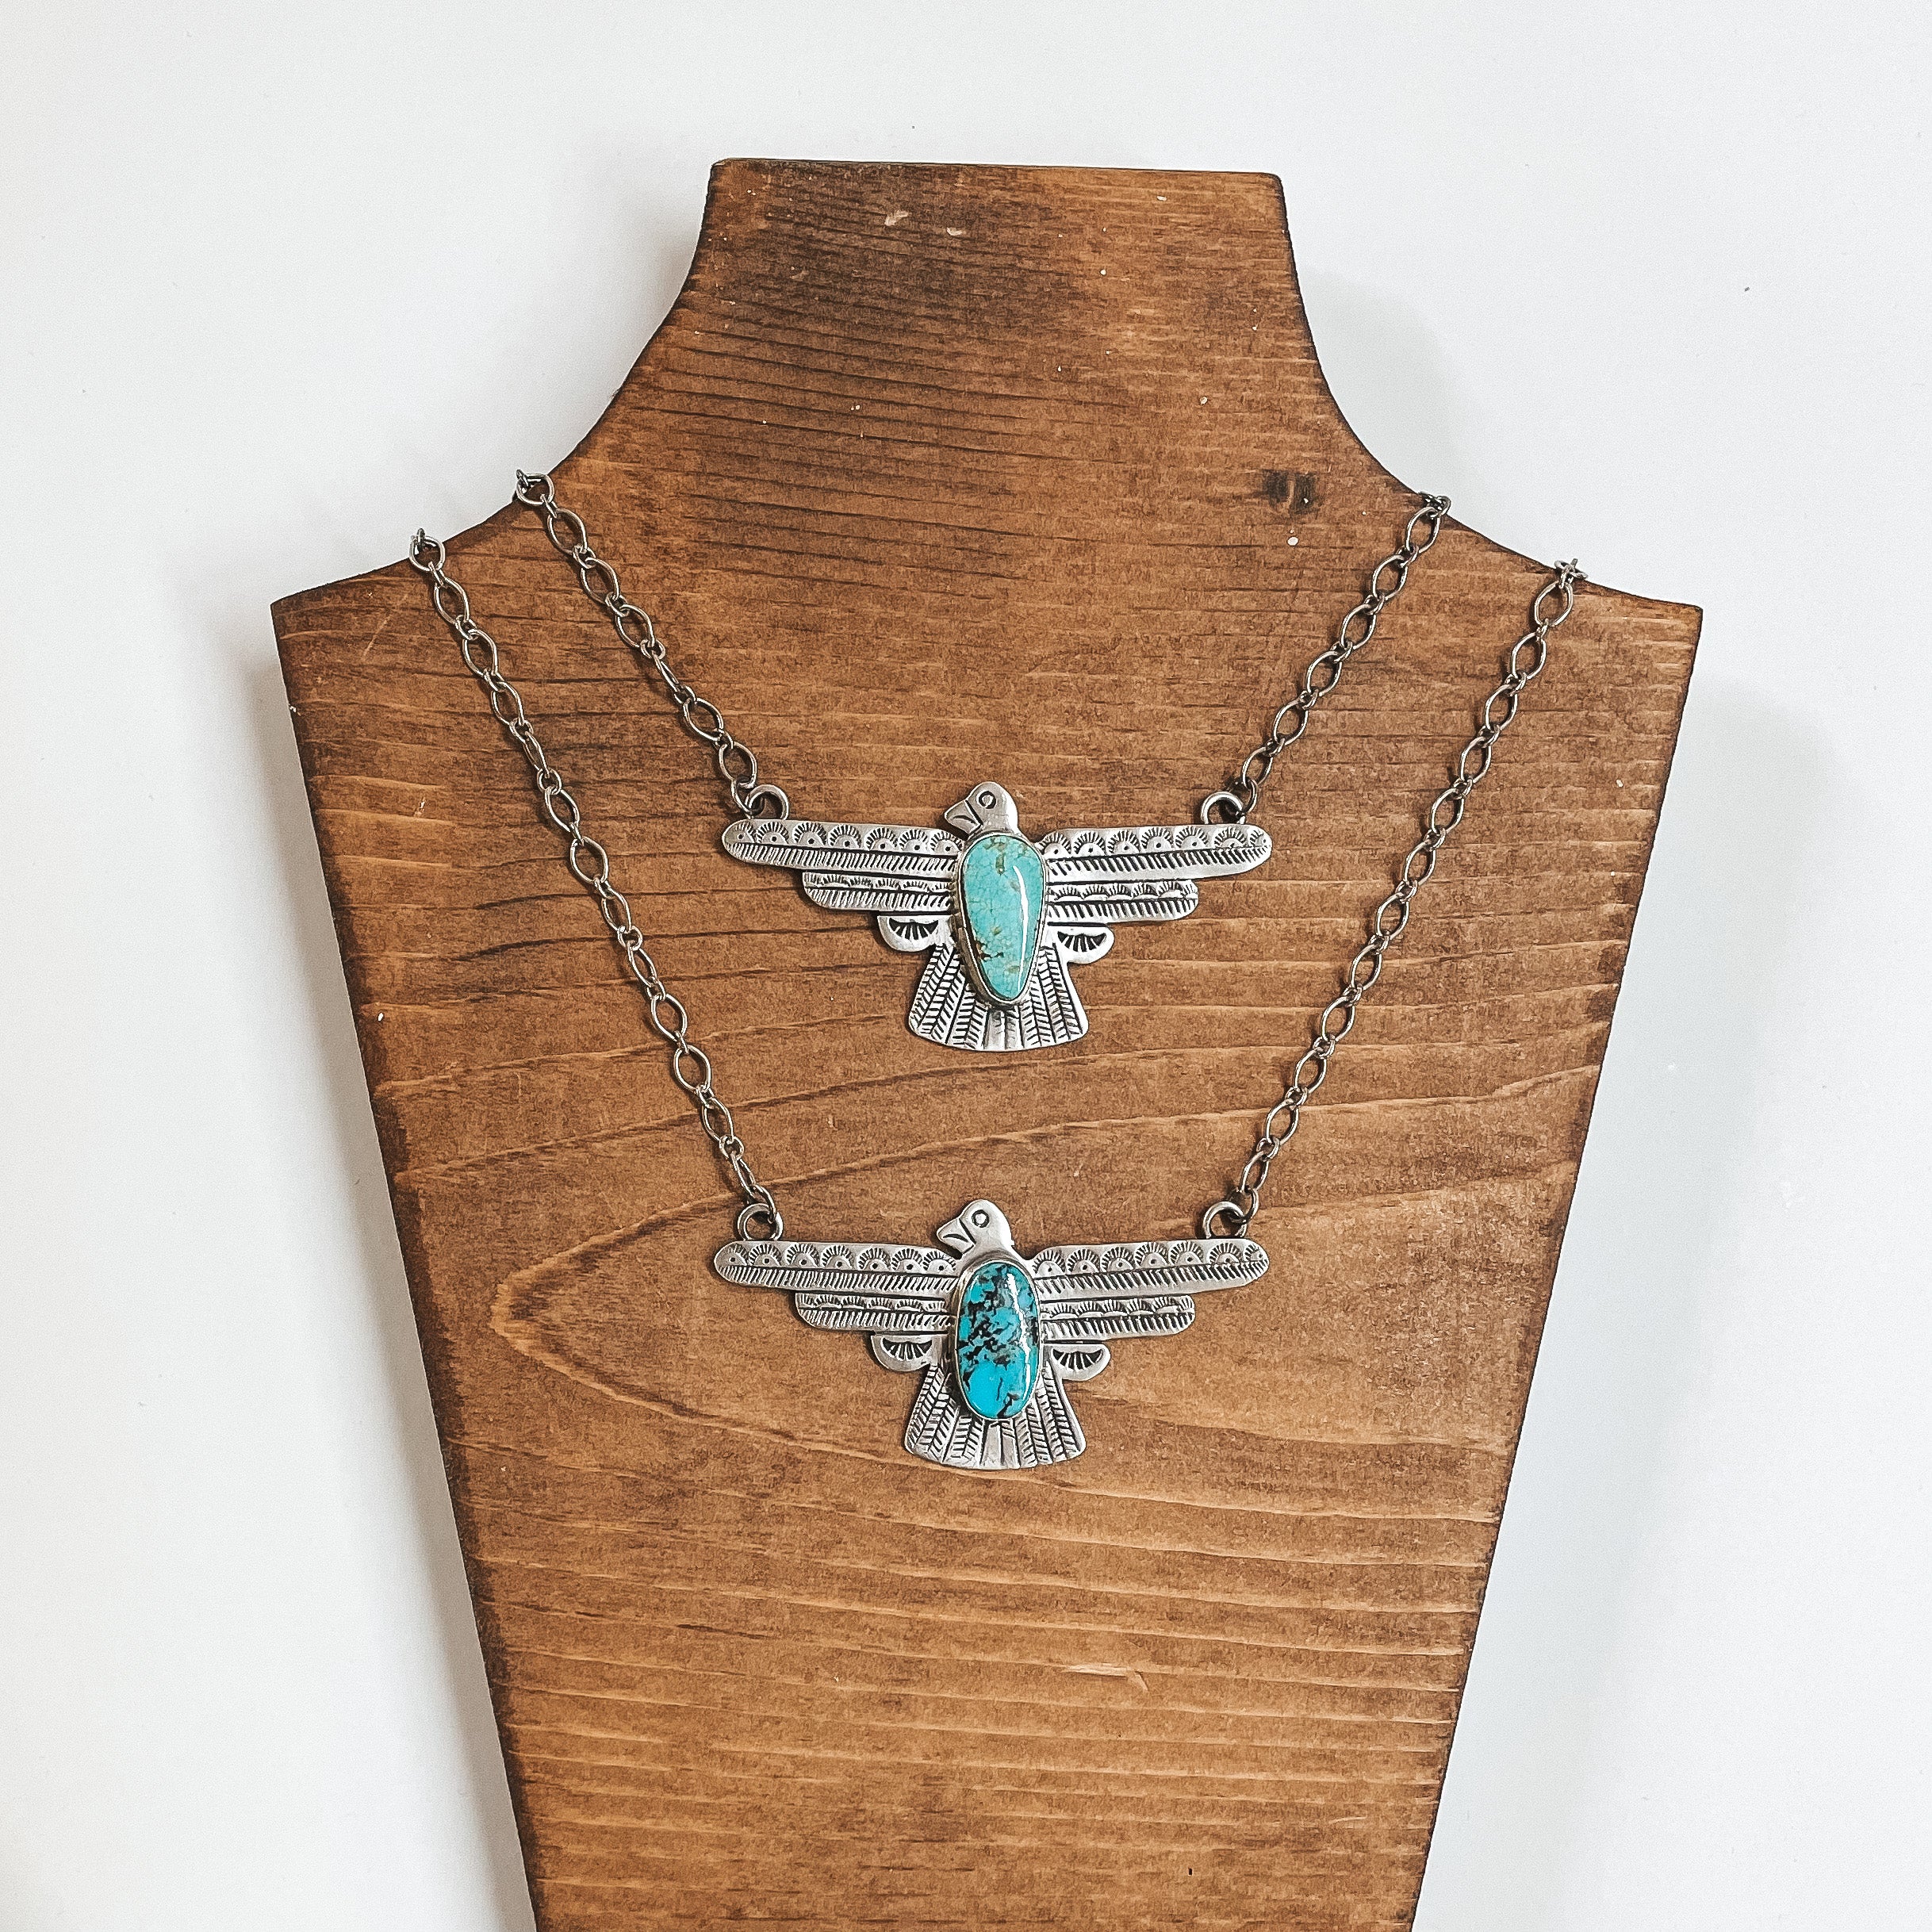 Two silver chain necklaces and they both have thunderbird pendants. Each pendant has a unique shape, size, and shade turquoise stone. These necklaces are pictured on a white background with silver beads under the necklaces.